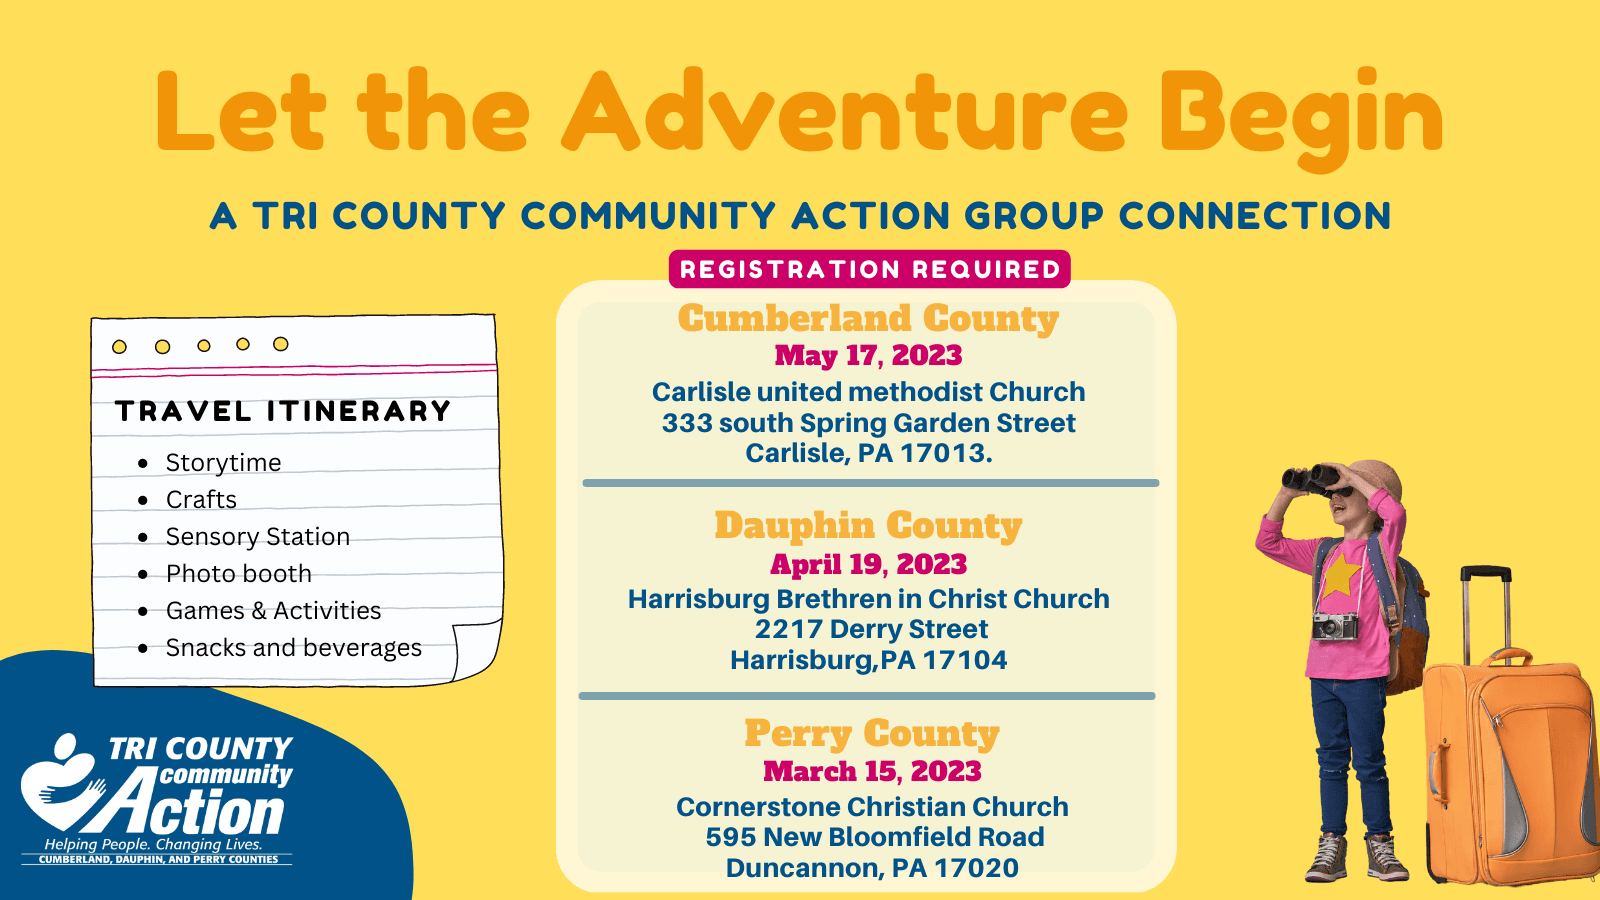 Let the Adventure Begin | Cumberland County Group Connection